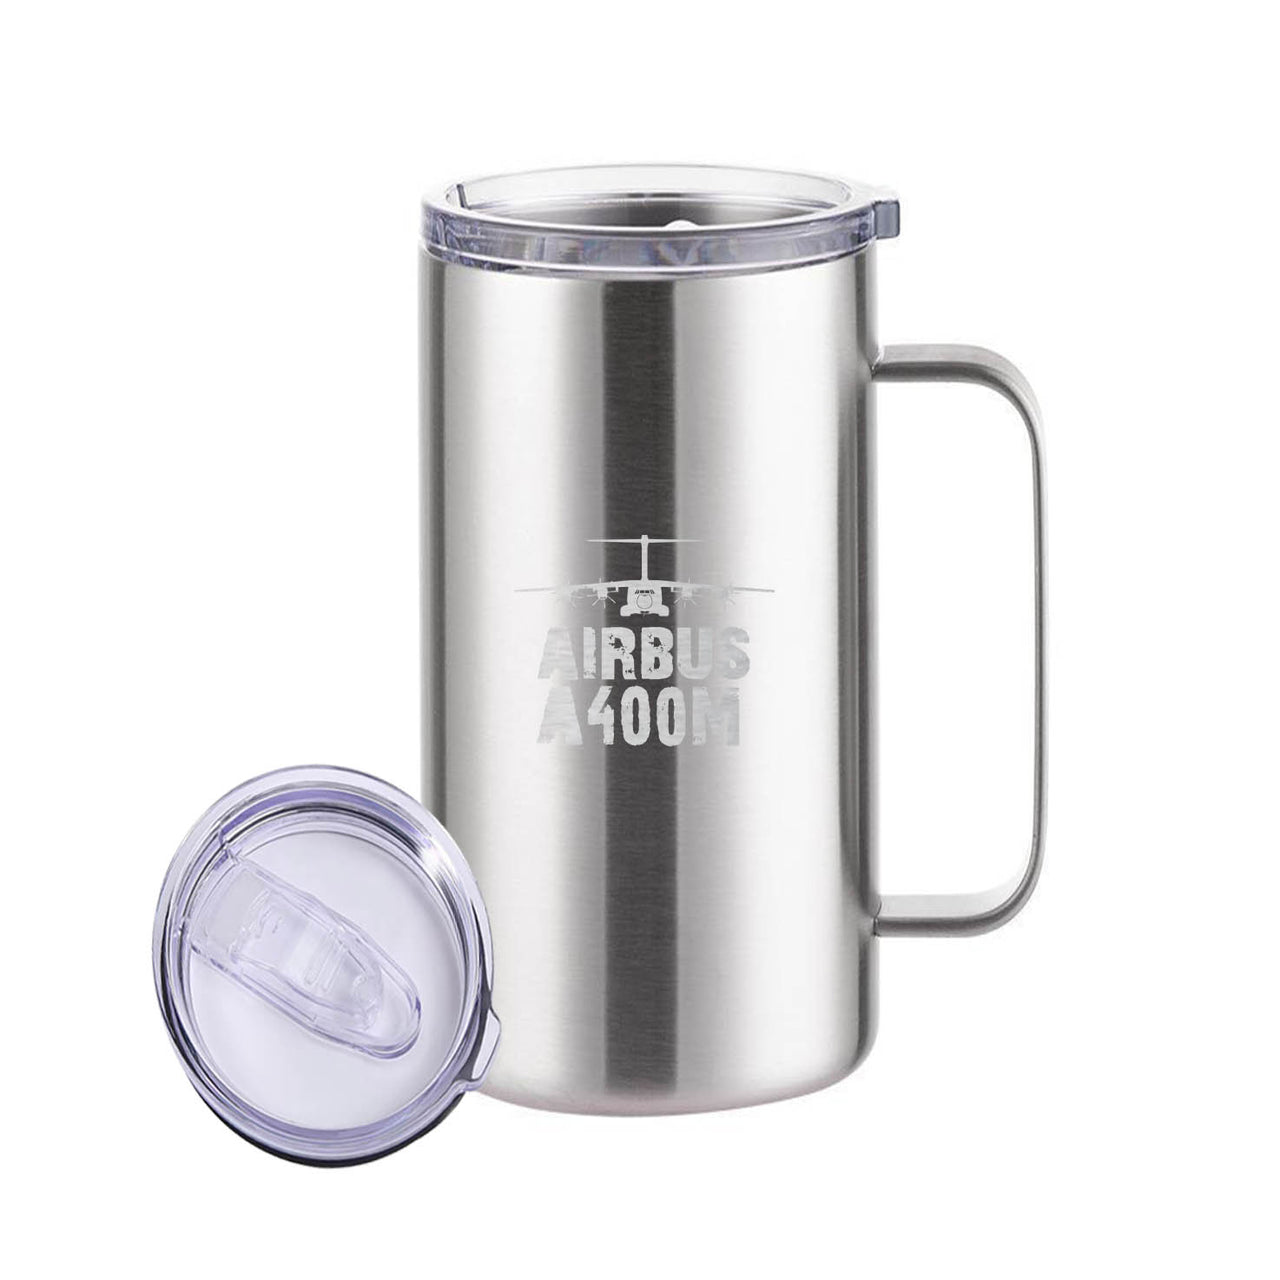 Airbus A400M & Plane Designed Stainless Steel Beer Mugs